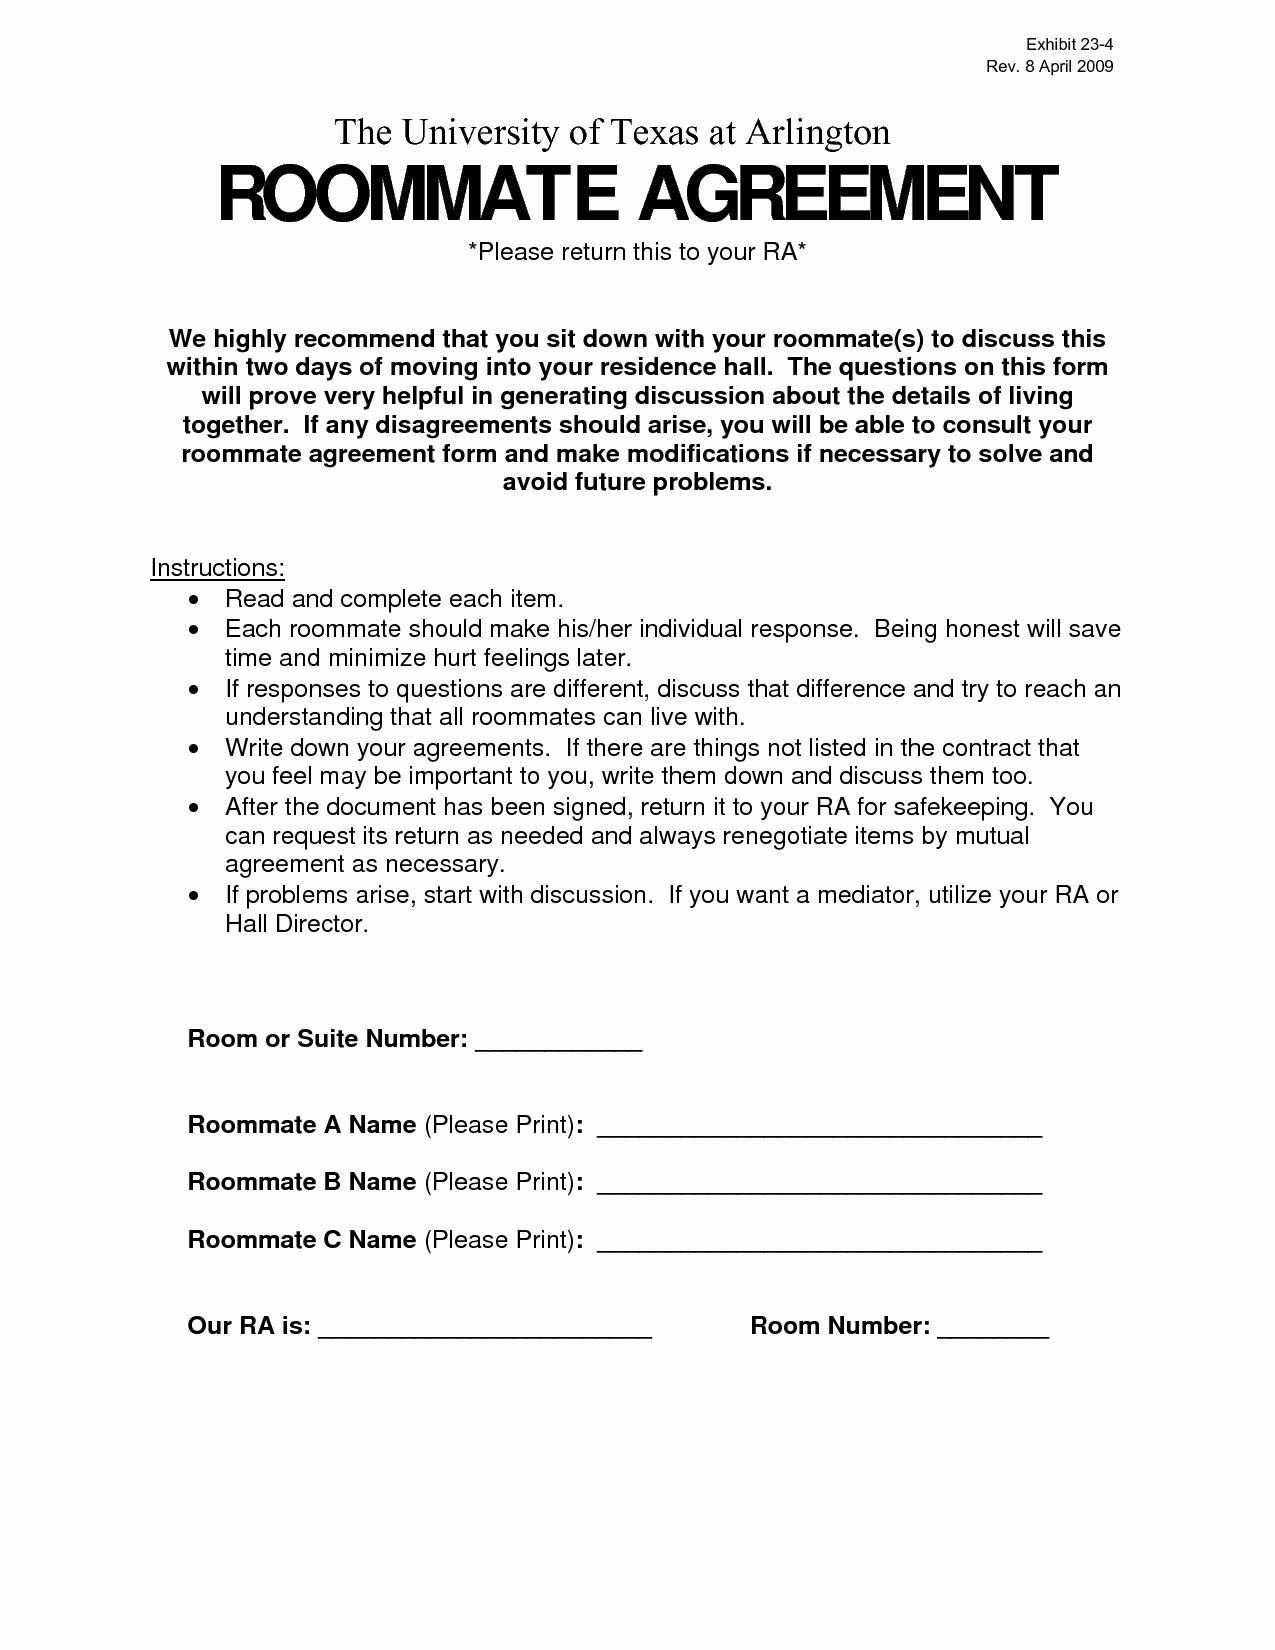 Roommate Agreement Ideas Best Of Delighted Roommate Agreement 